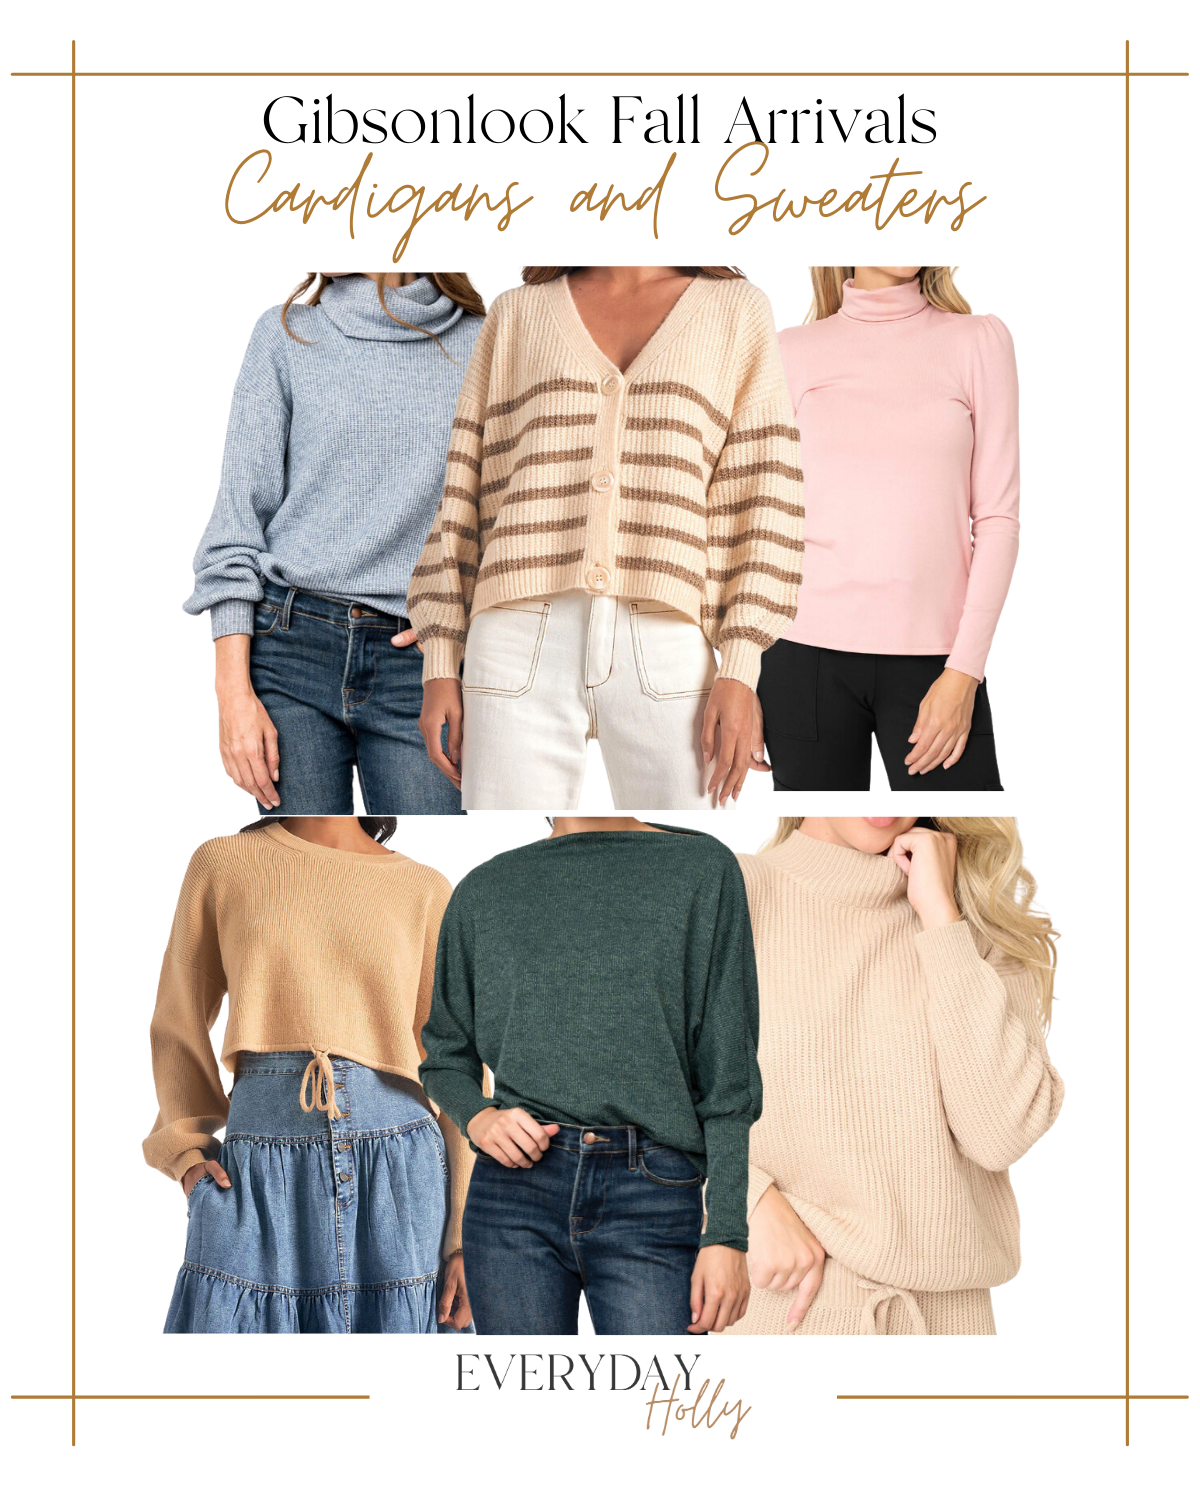 fall pieces you will want in your closet | #fall #autumn #wardrobe #closet #gibsonlook #fashion #fallfashion #turtleneck #cowlneck #cardigan #stripes #neutral #drawstring #hoodie #slouchy #relaxed #oversized